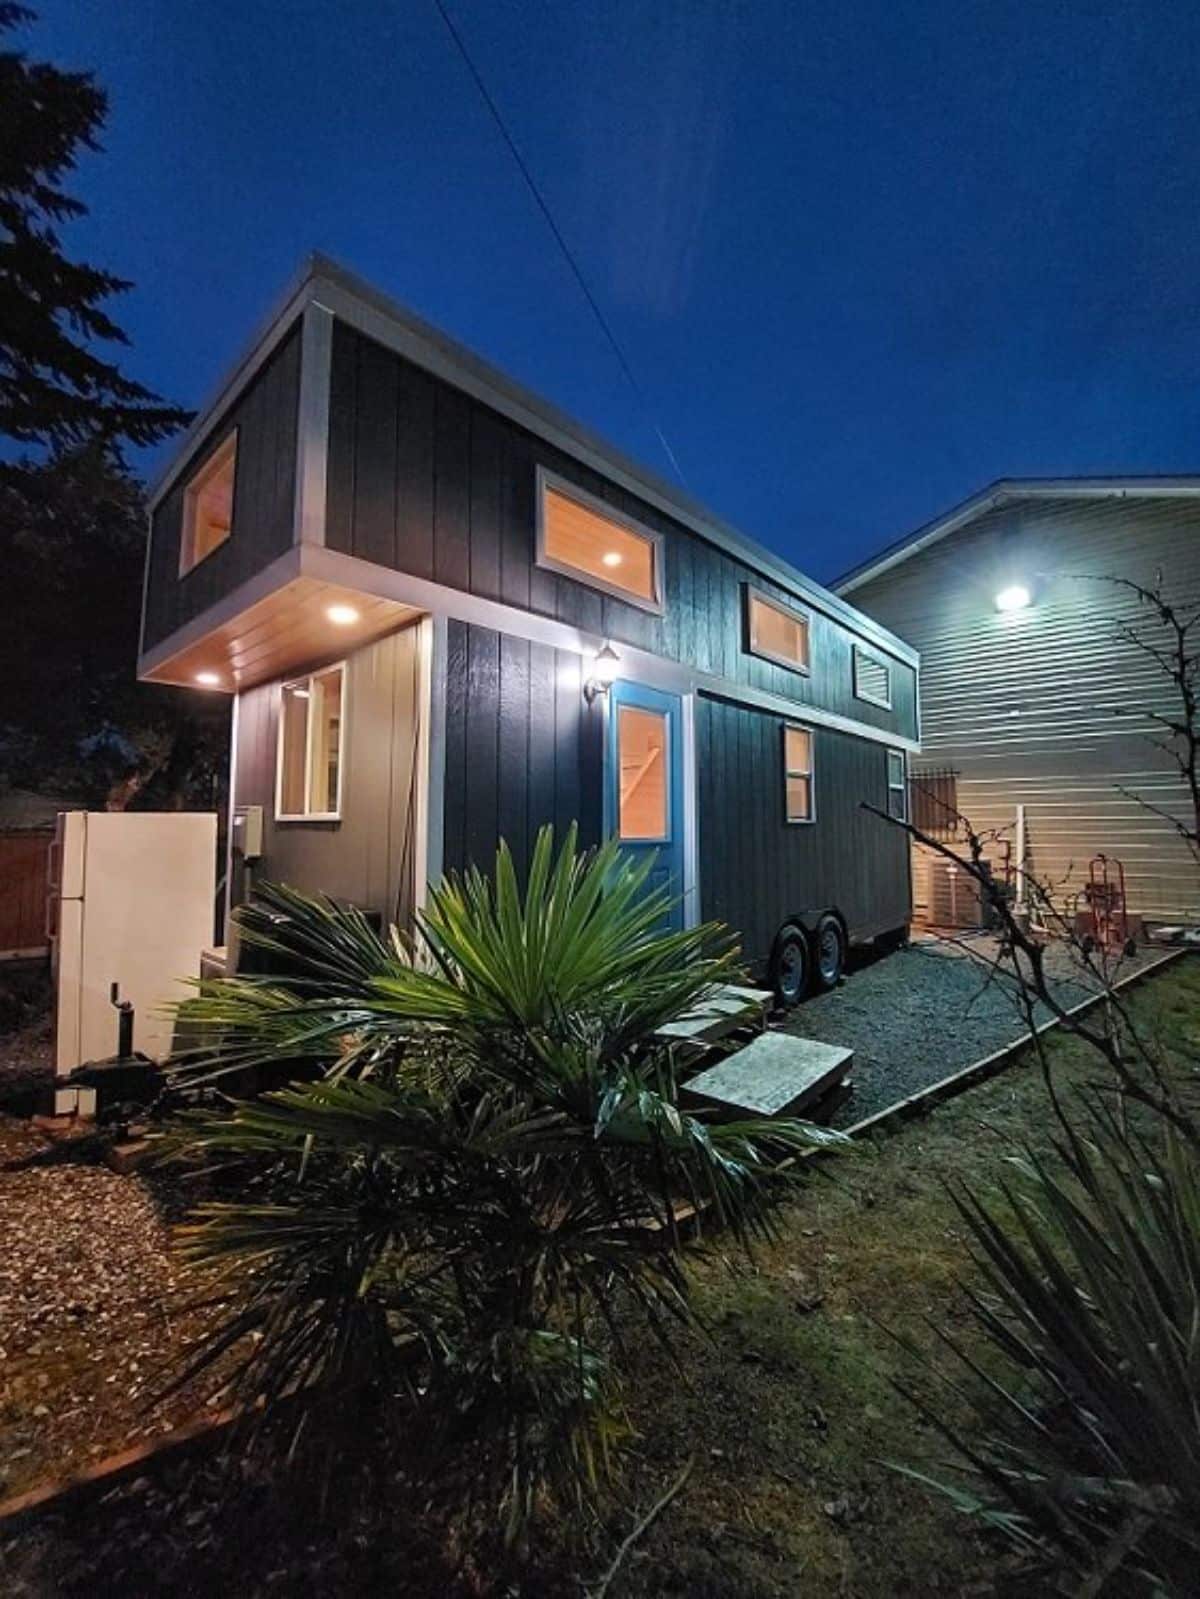 Main entrance view of 24’ tiny house on wheels